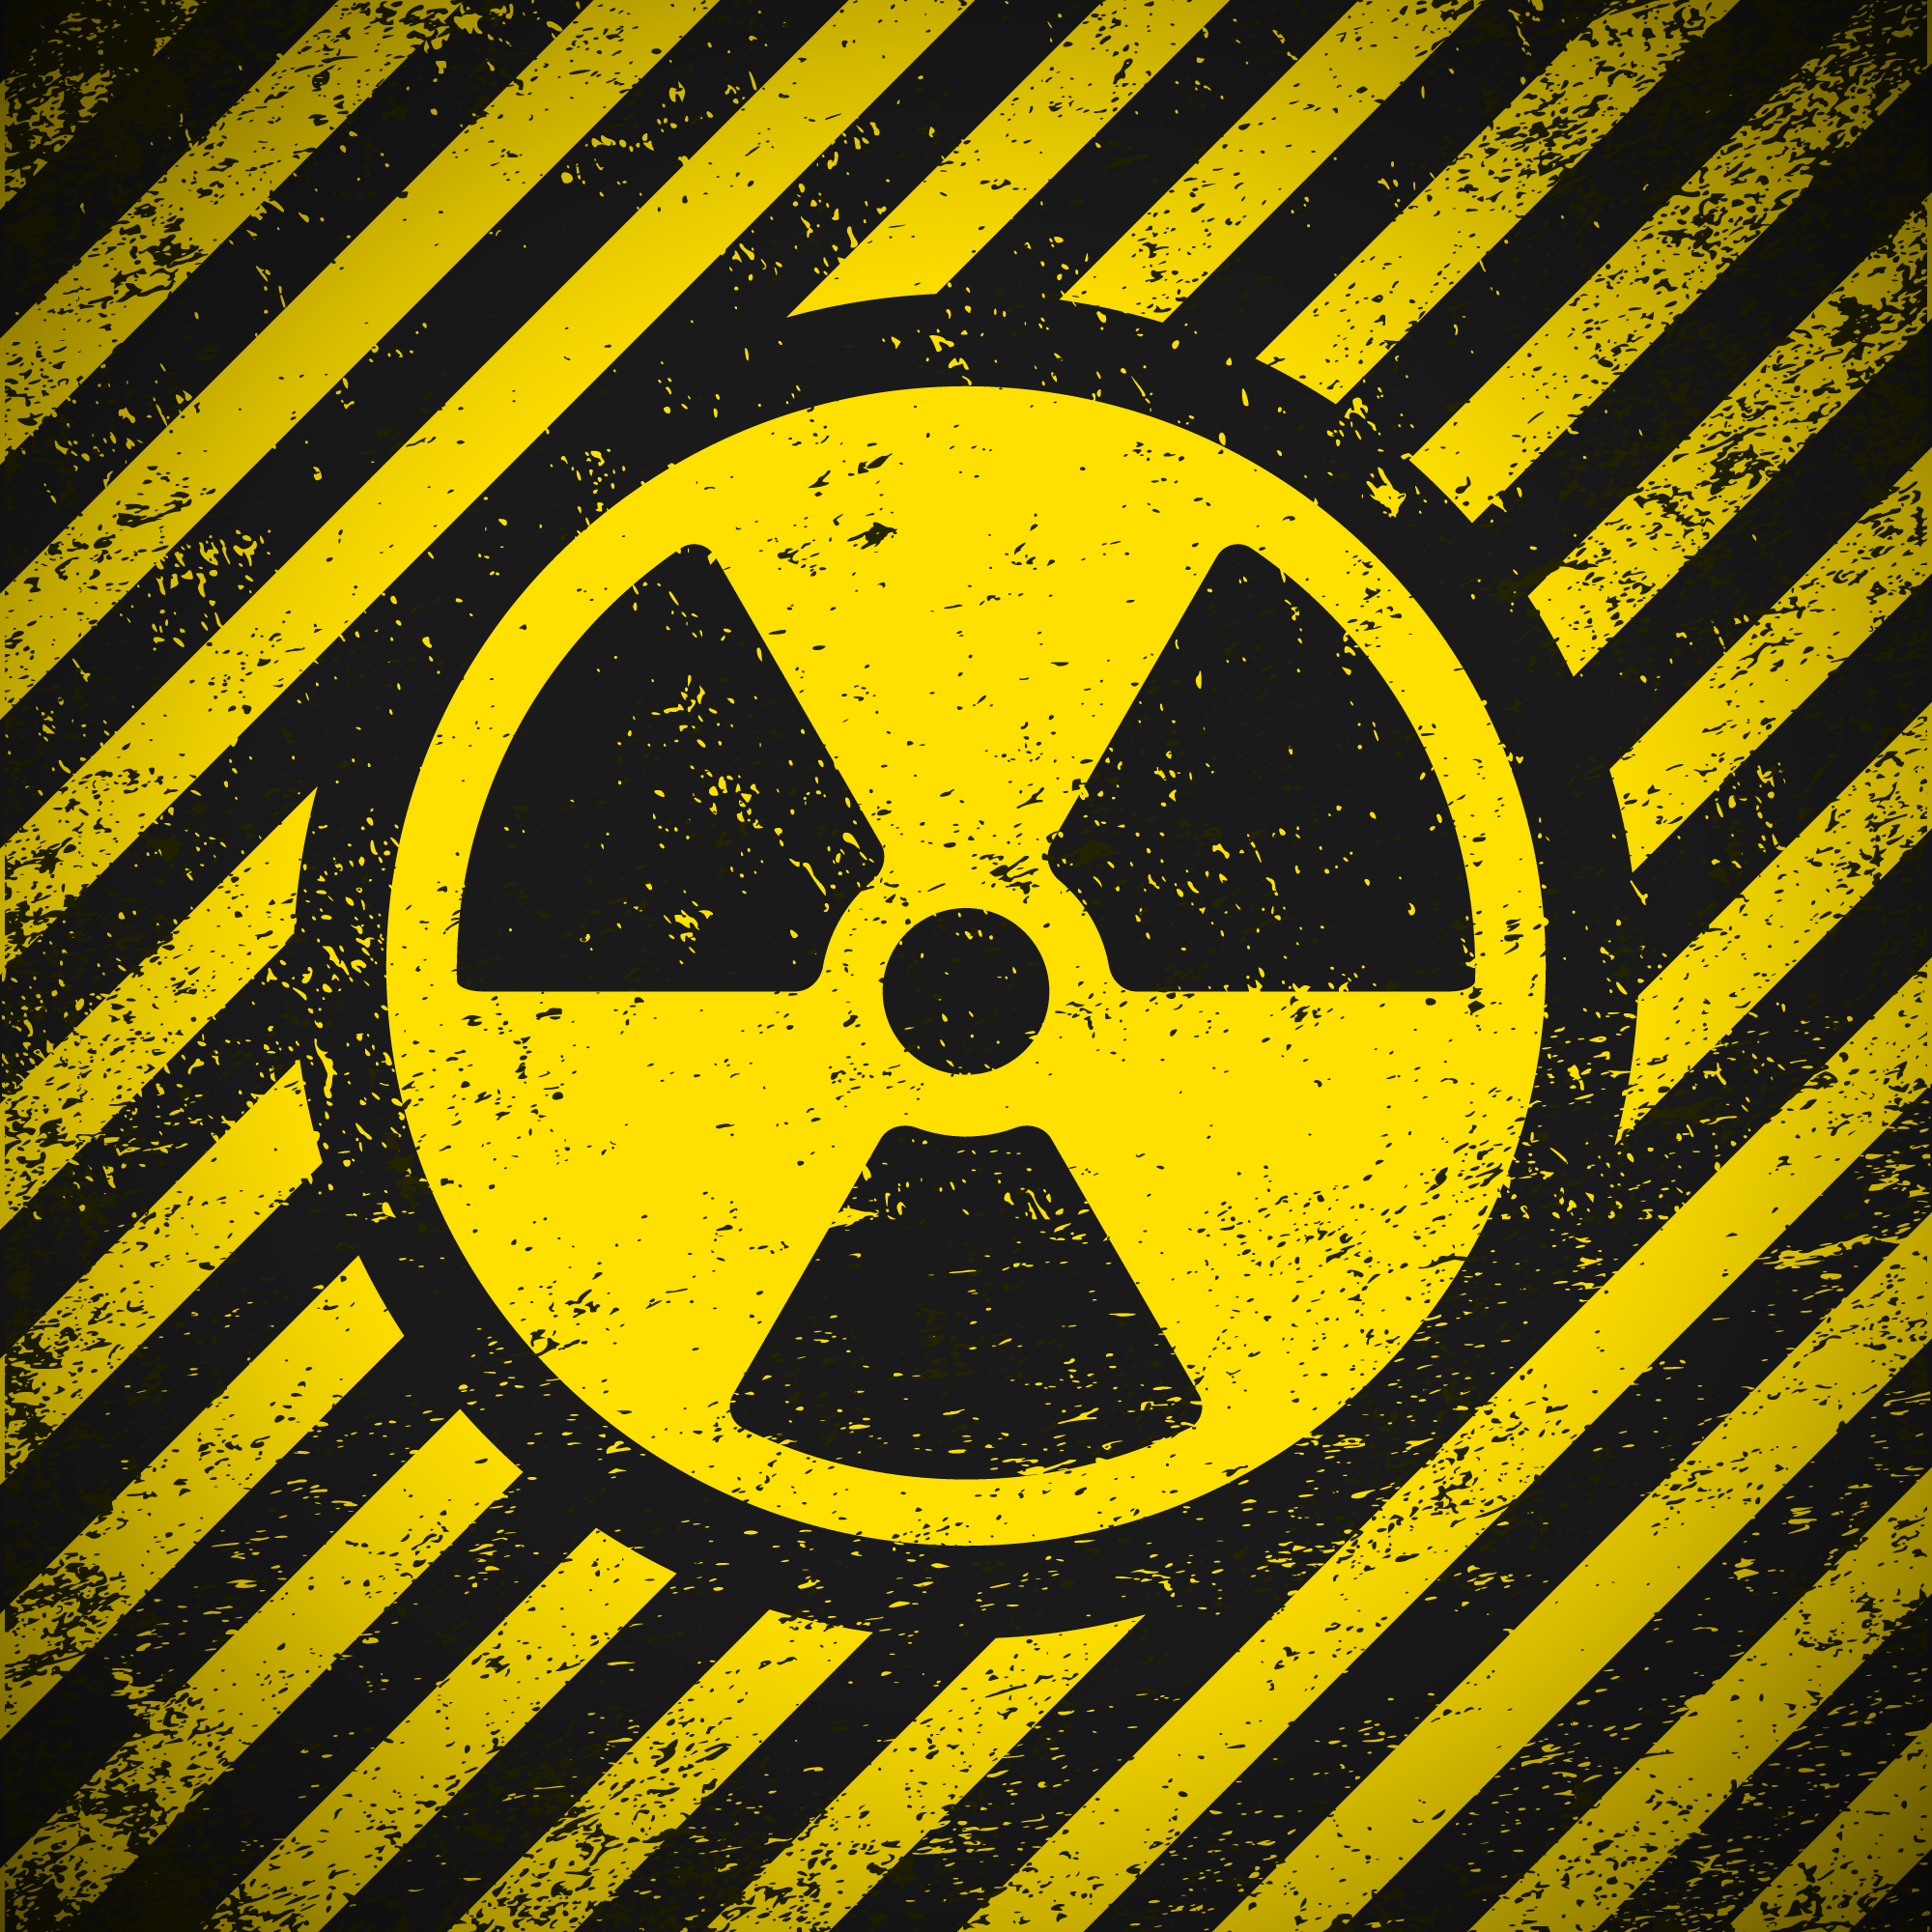 Radioactive Substance for Nuclear War 